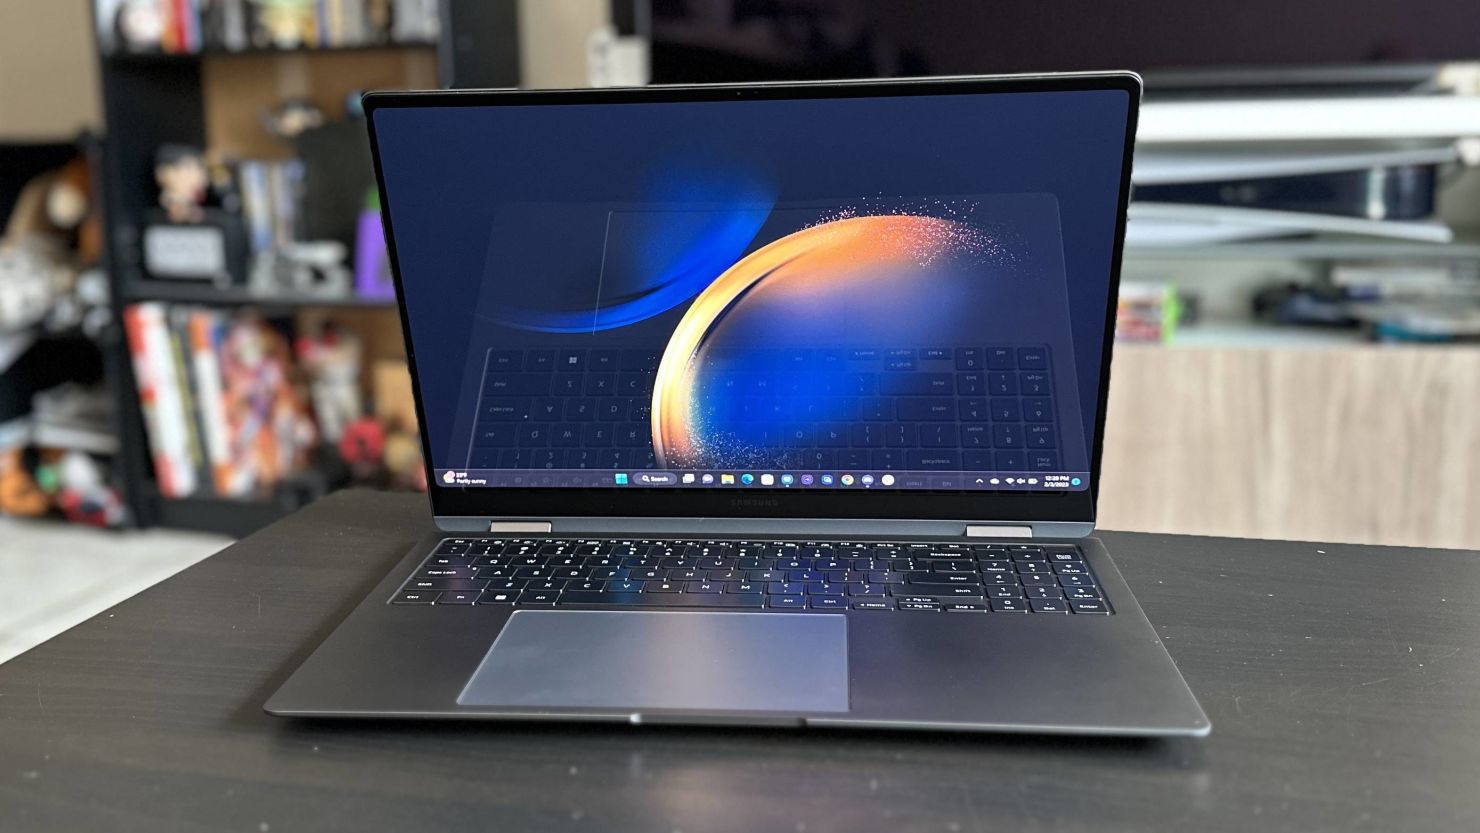 Samsung Galaxy Book 3 Pro, Book 3 Pro 360 images and specs leak - SamMobile